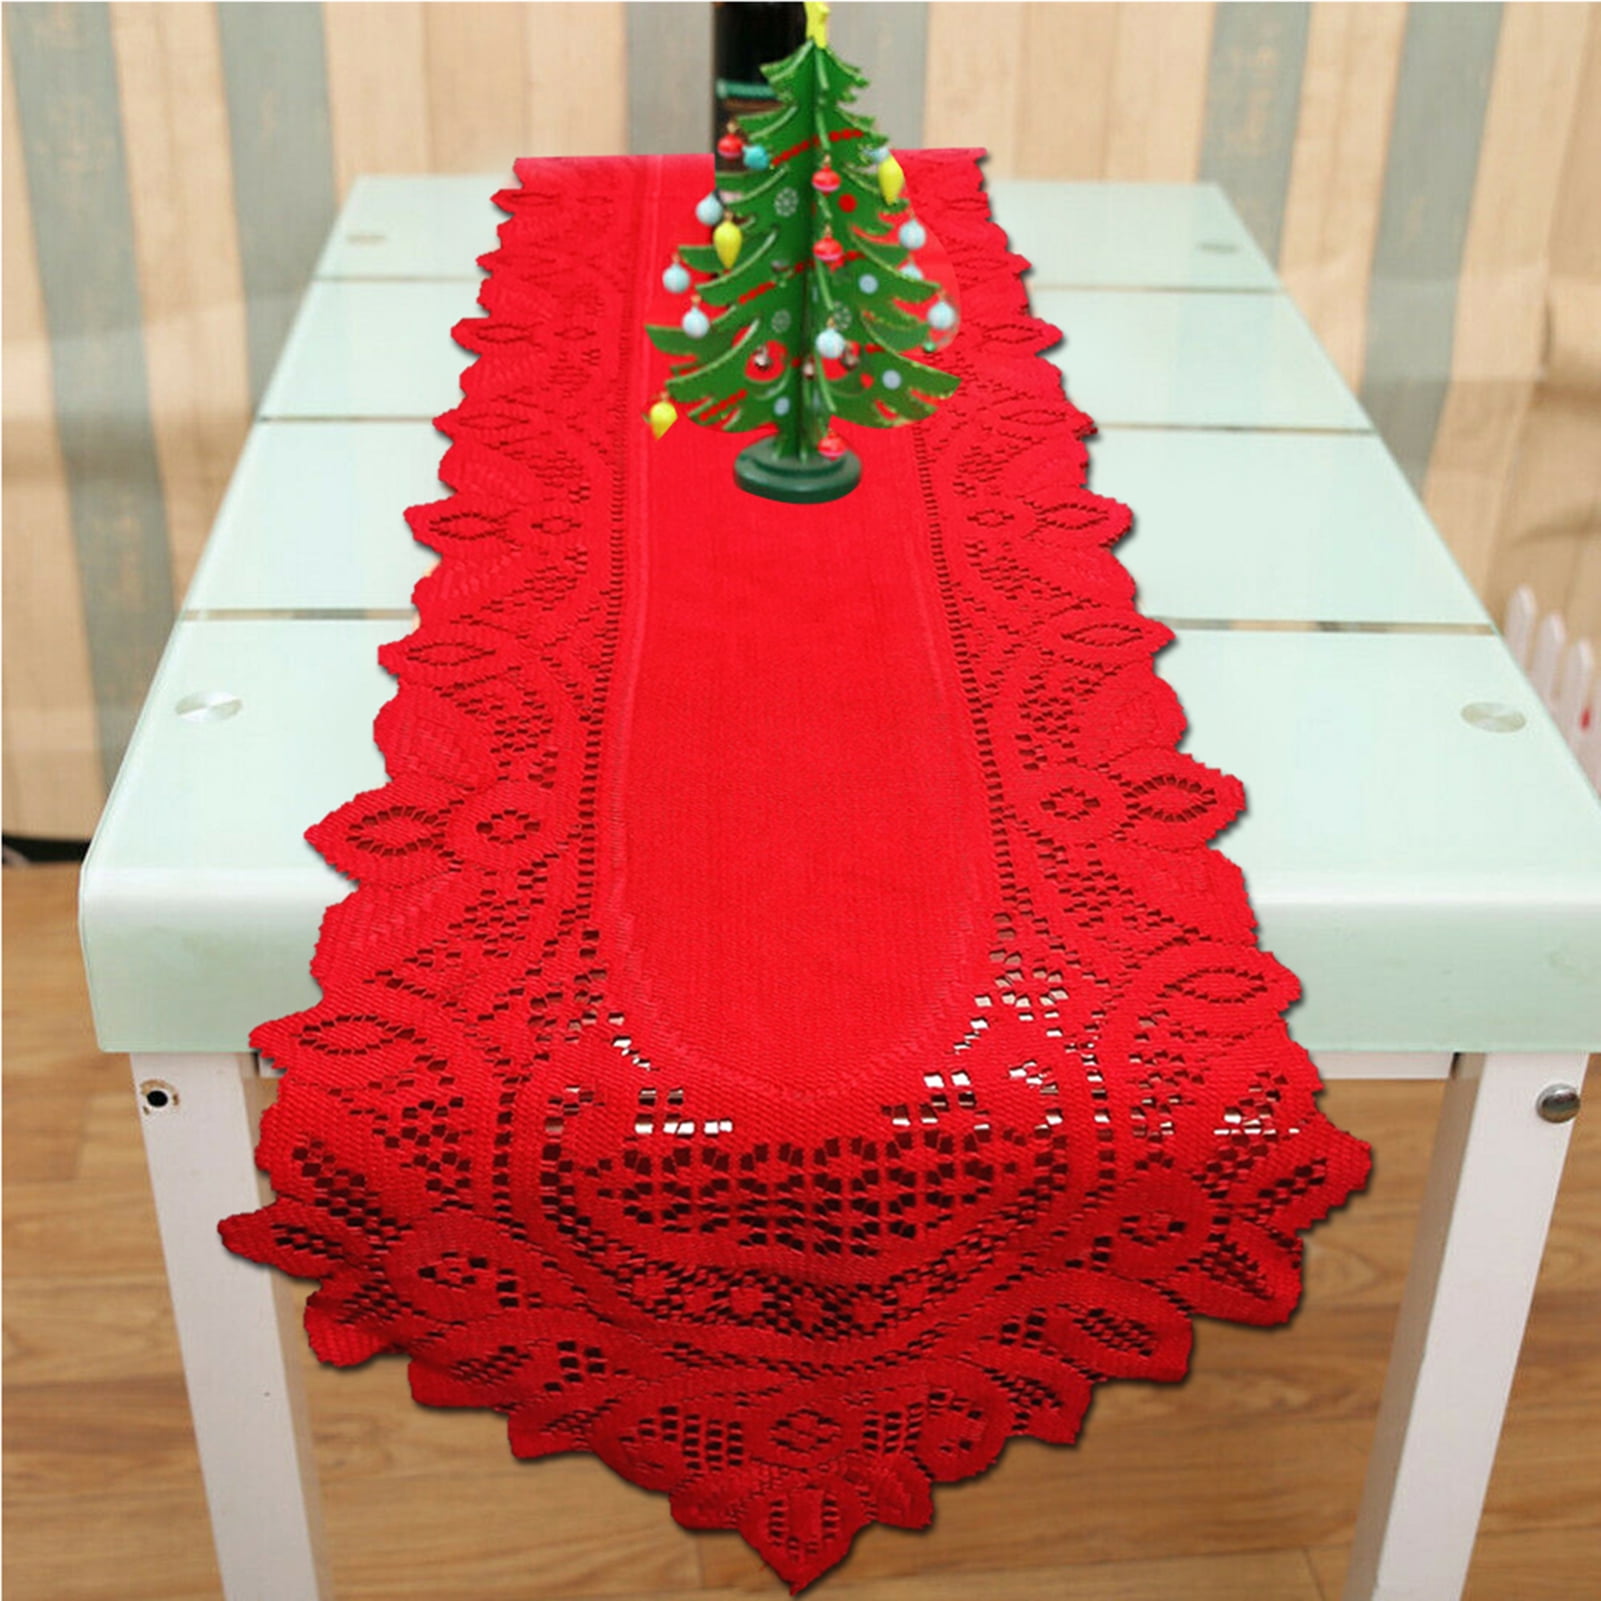 13"x71" Red Christmas Table Runner Vintage Lace Table Decoration Home Party